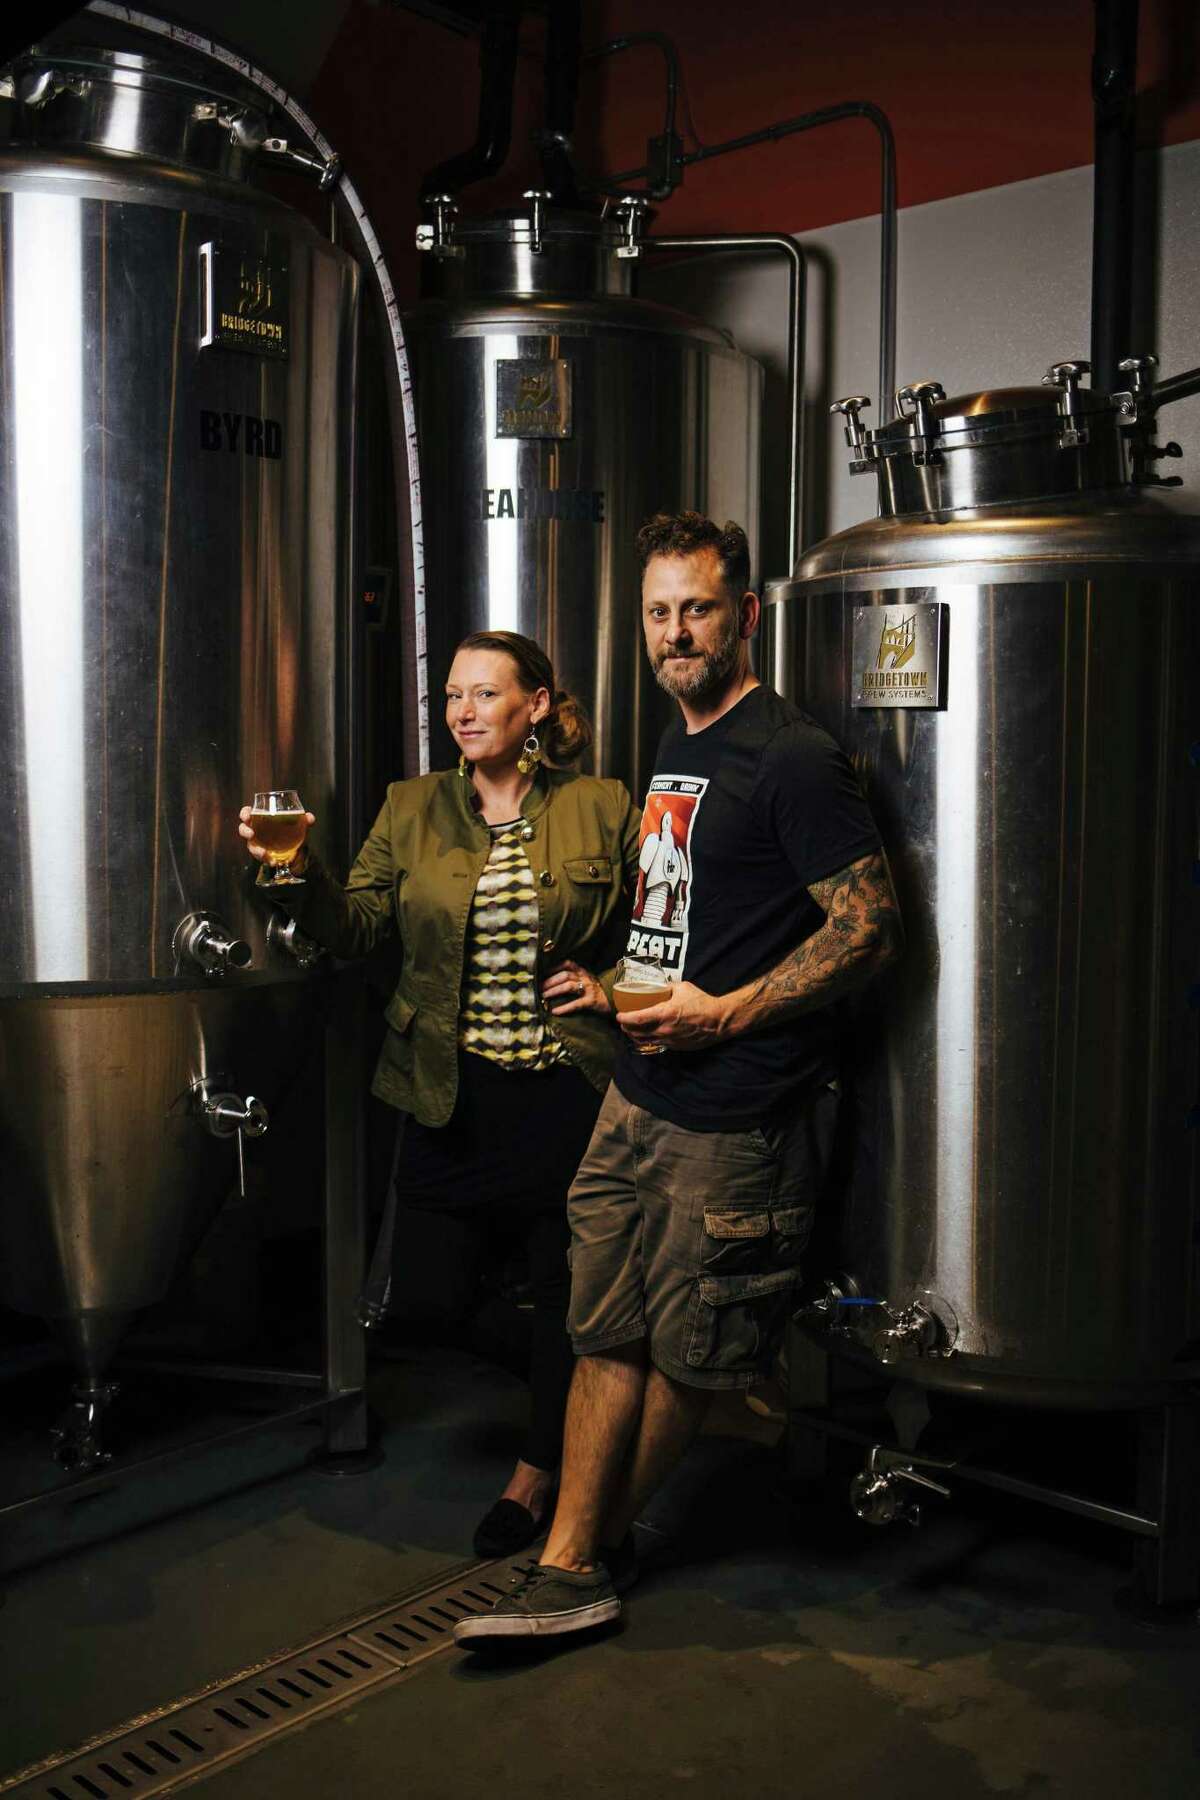 Owners, Shae Inglin and Kevin and Inglin, photographed at their brewery, FDR, in San Francisco, Calif. Thursday, September 14, 2017.